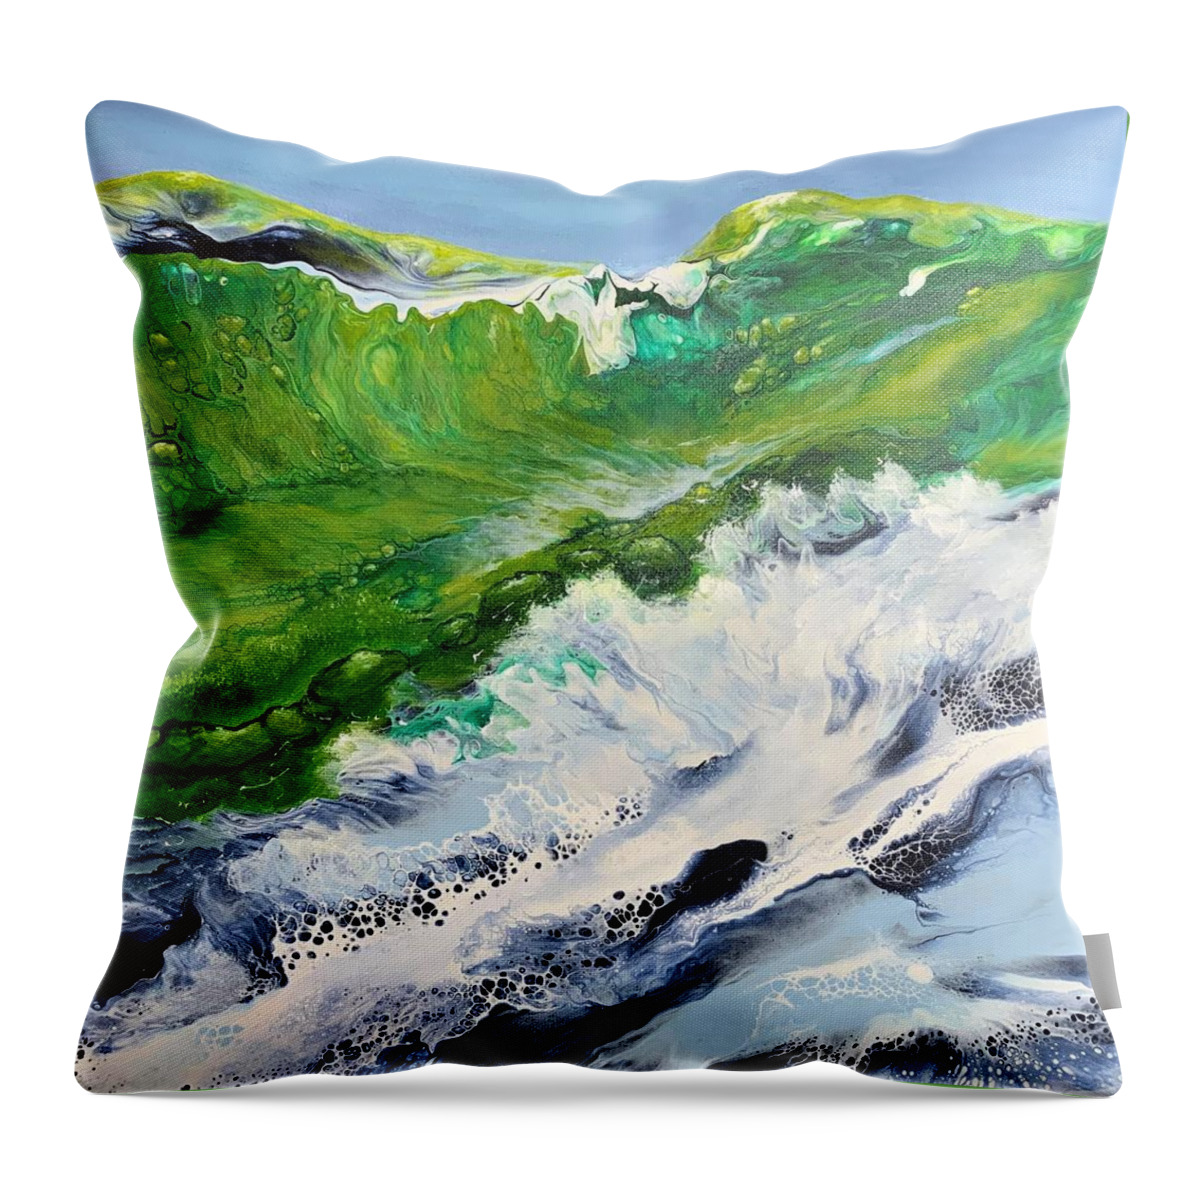 Acrylic Throw Pillow featuring the painting Rapids by Soraya Silvestri